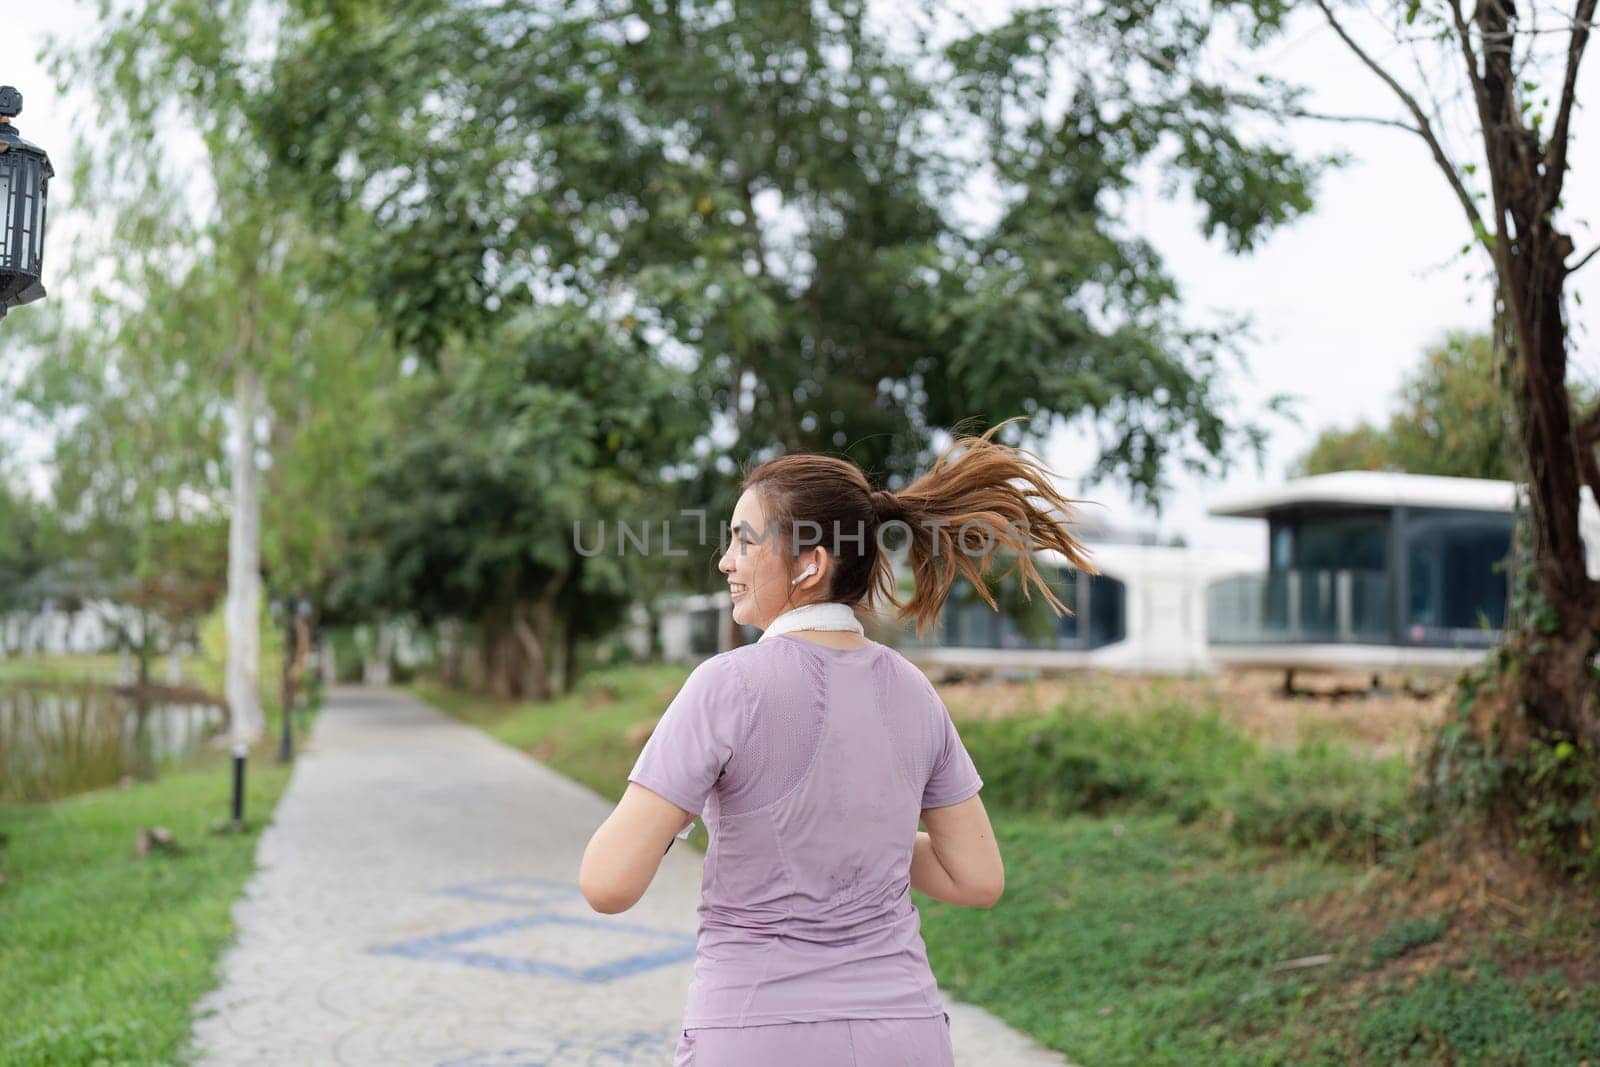 Running woman. Female Runner Jogging during Outdoor Workout in a Park. Healthy lifestyle. Morning by itchaznong